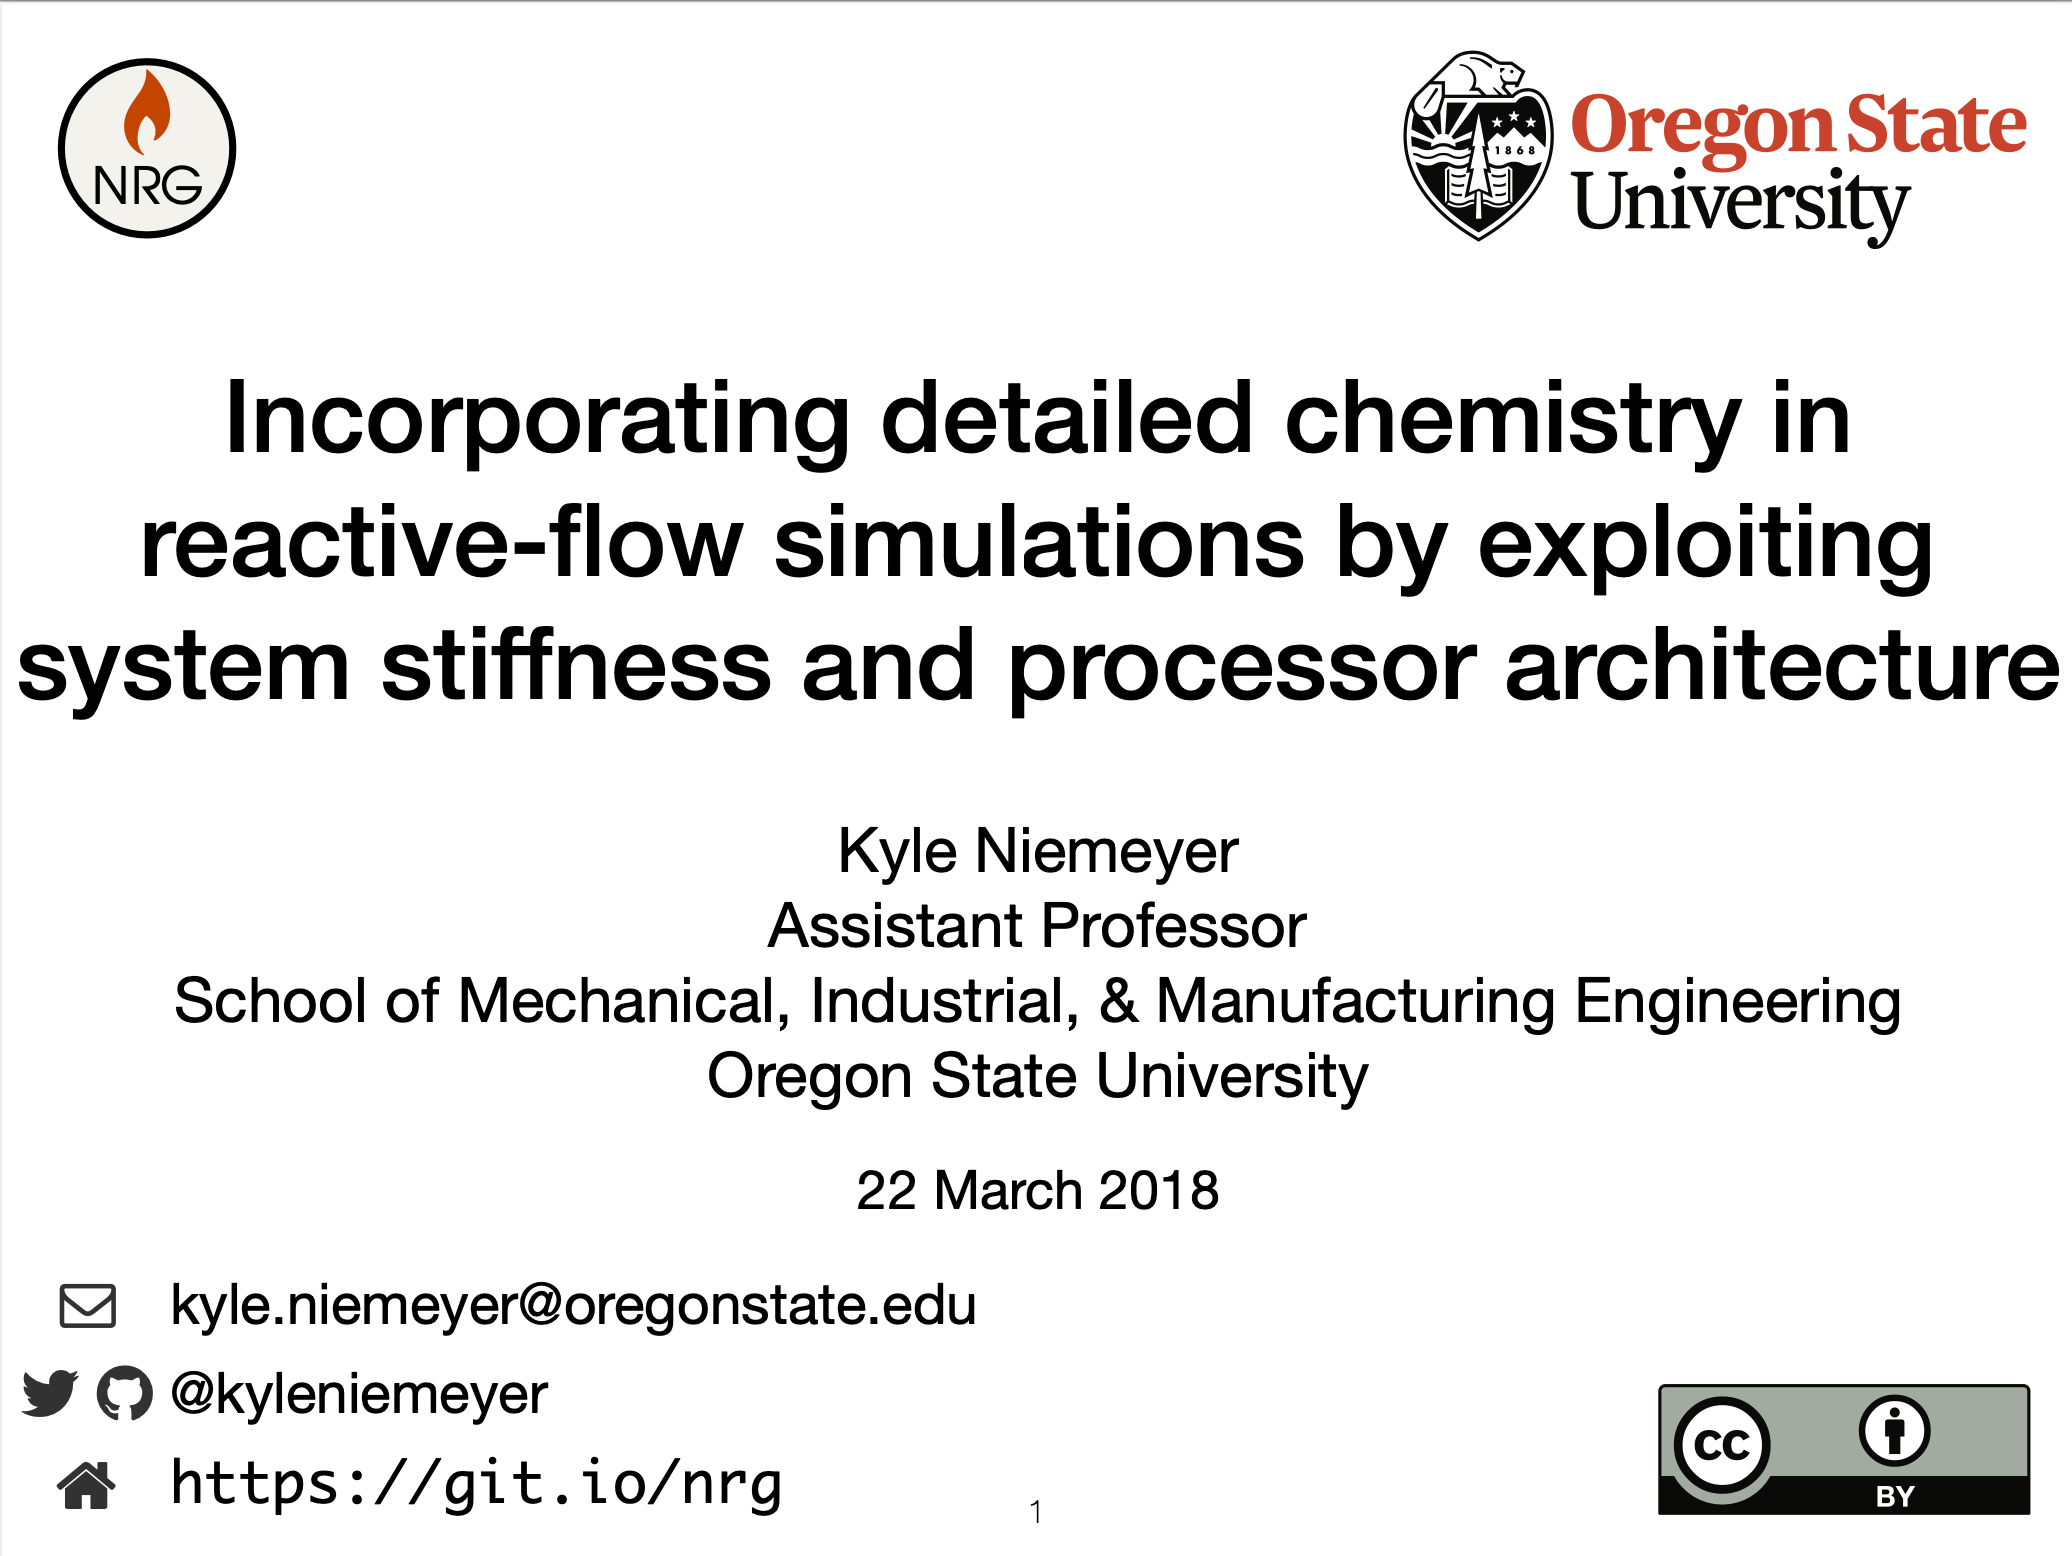 Title slide, that says 'Incorporating detailed chemistry in reactive-flow simulations by exploiting system stiffness and processor architecture'.